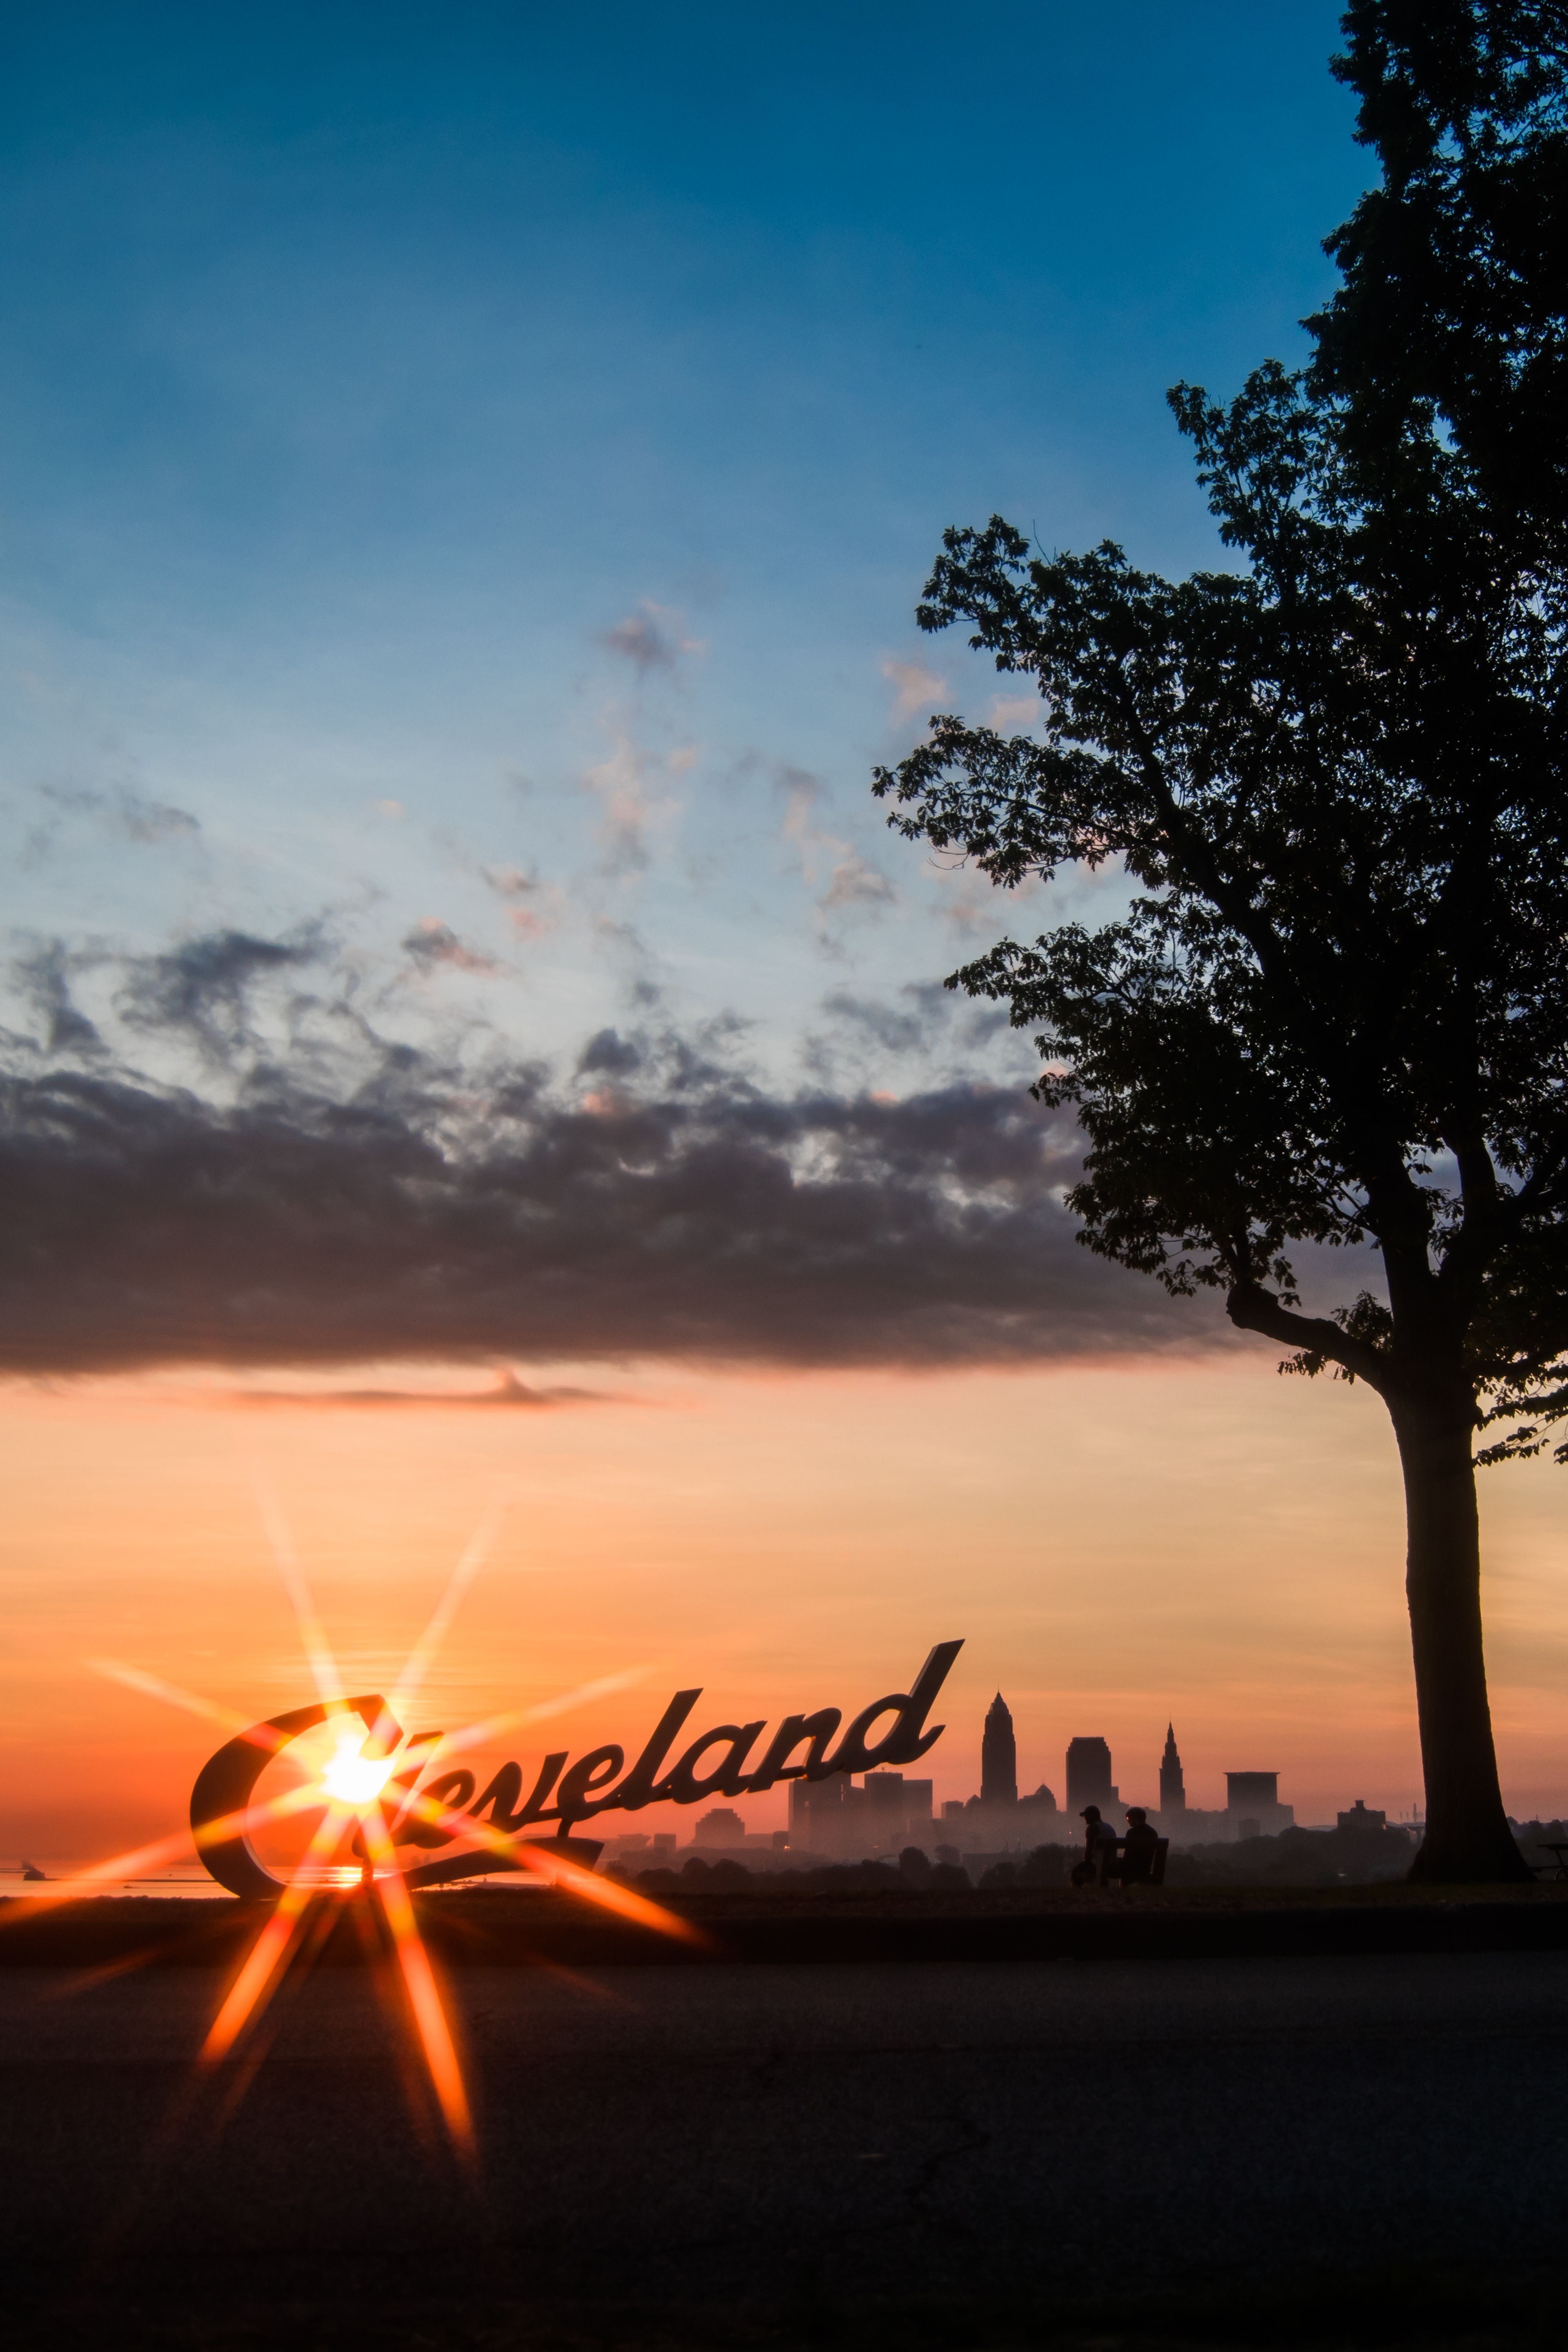 android cities, sunset, silhouettes, night city, inscription, sunlight, cleveland